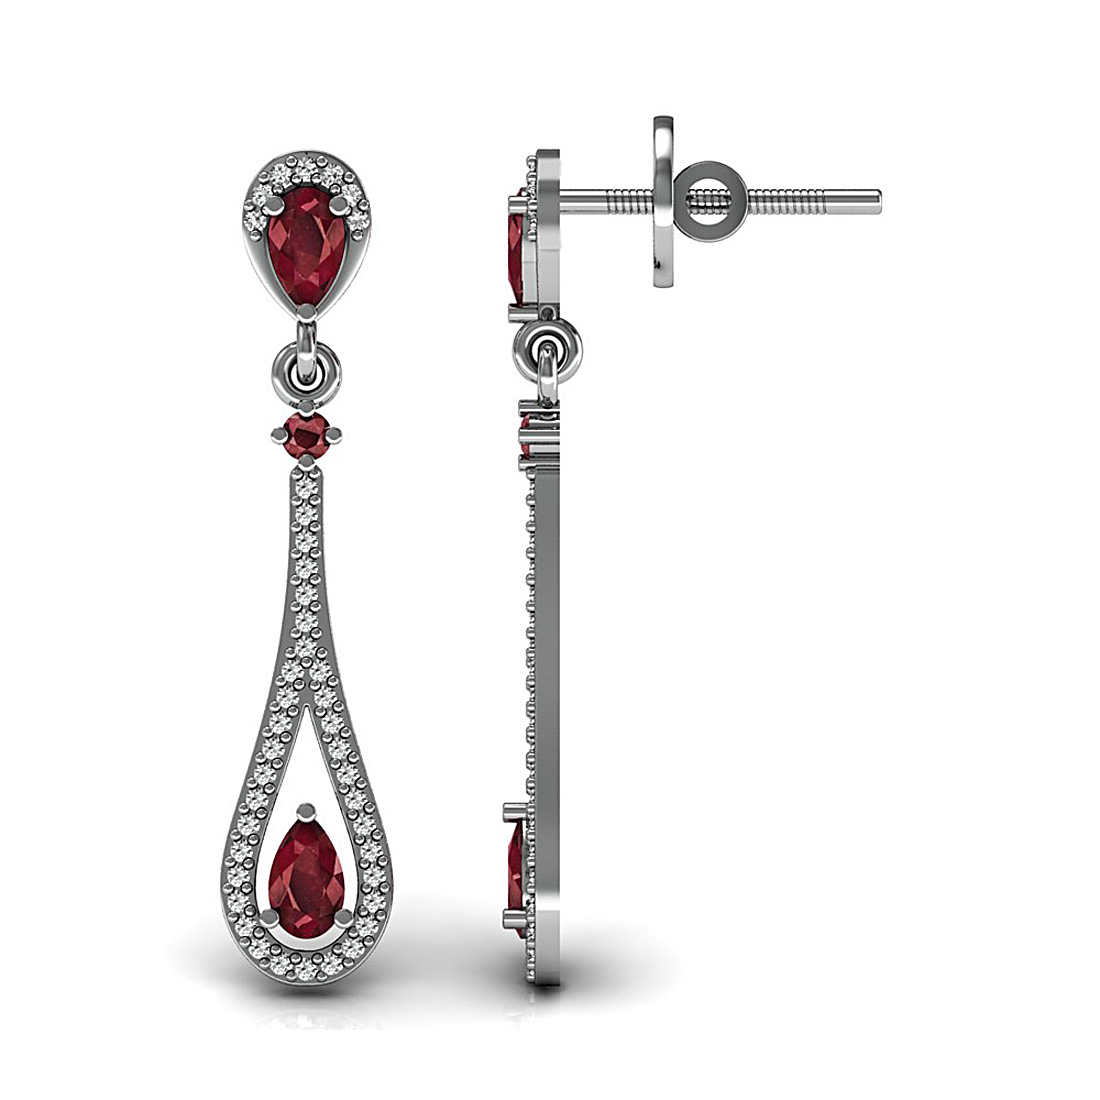 18K Solid white gold drop style dangle earrings studded with natural ruby gemstone and genuine diamond.